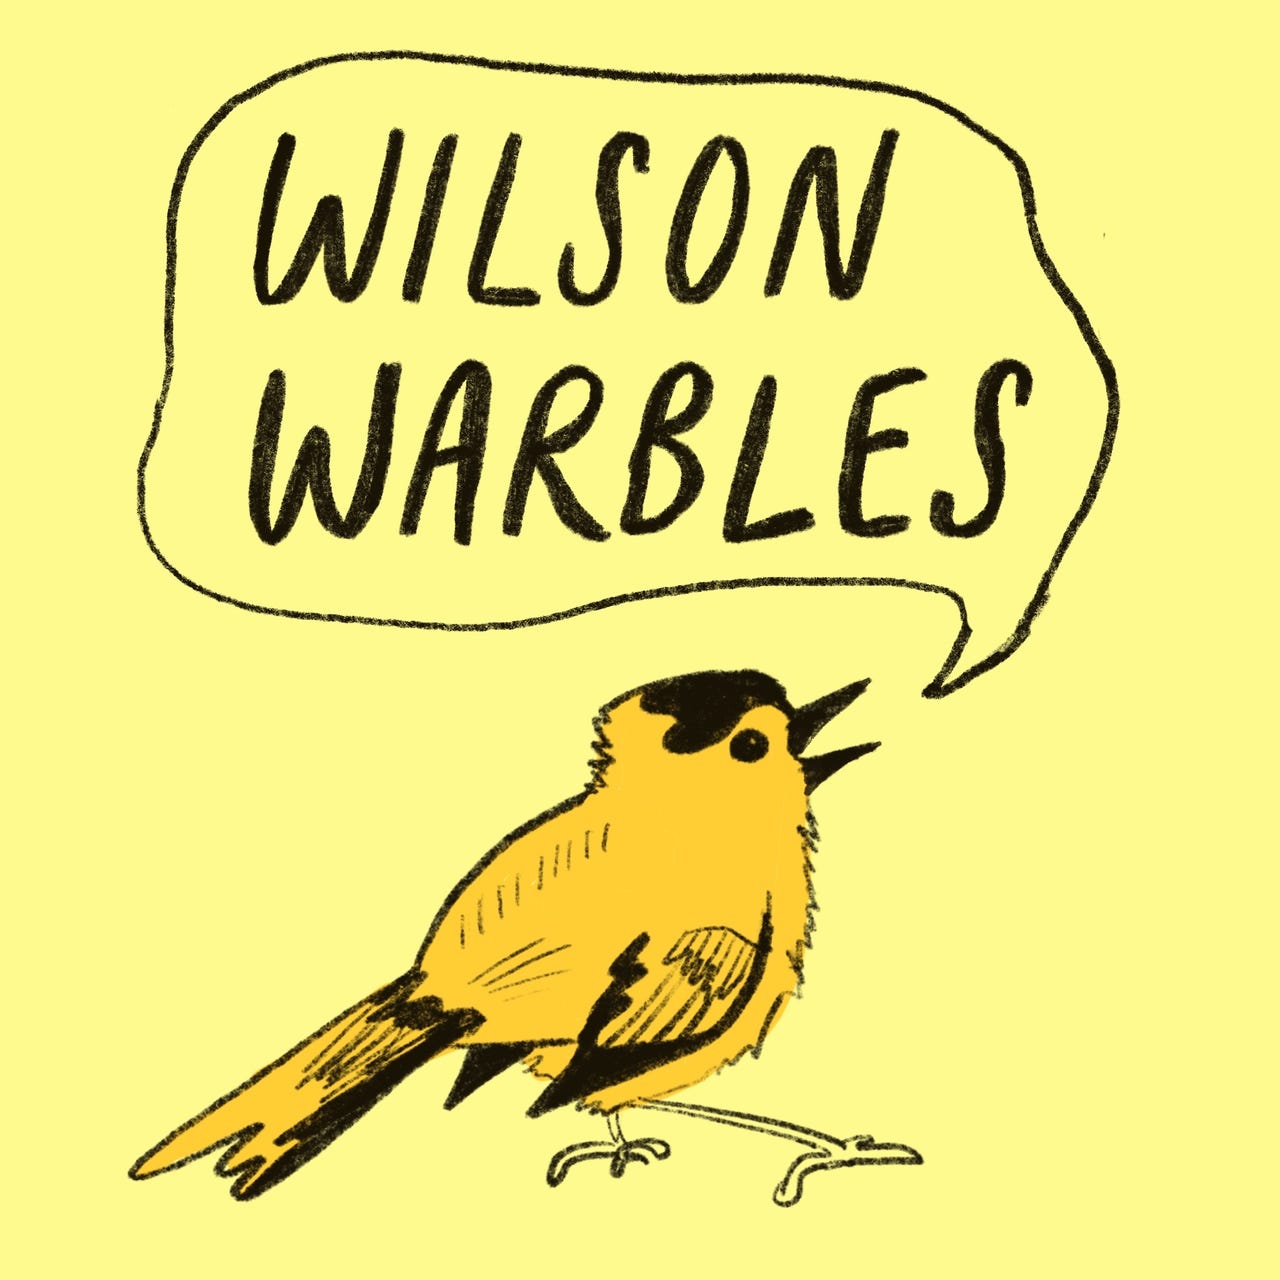 Artwork for Wilson Warbles